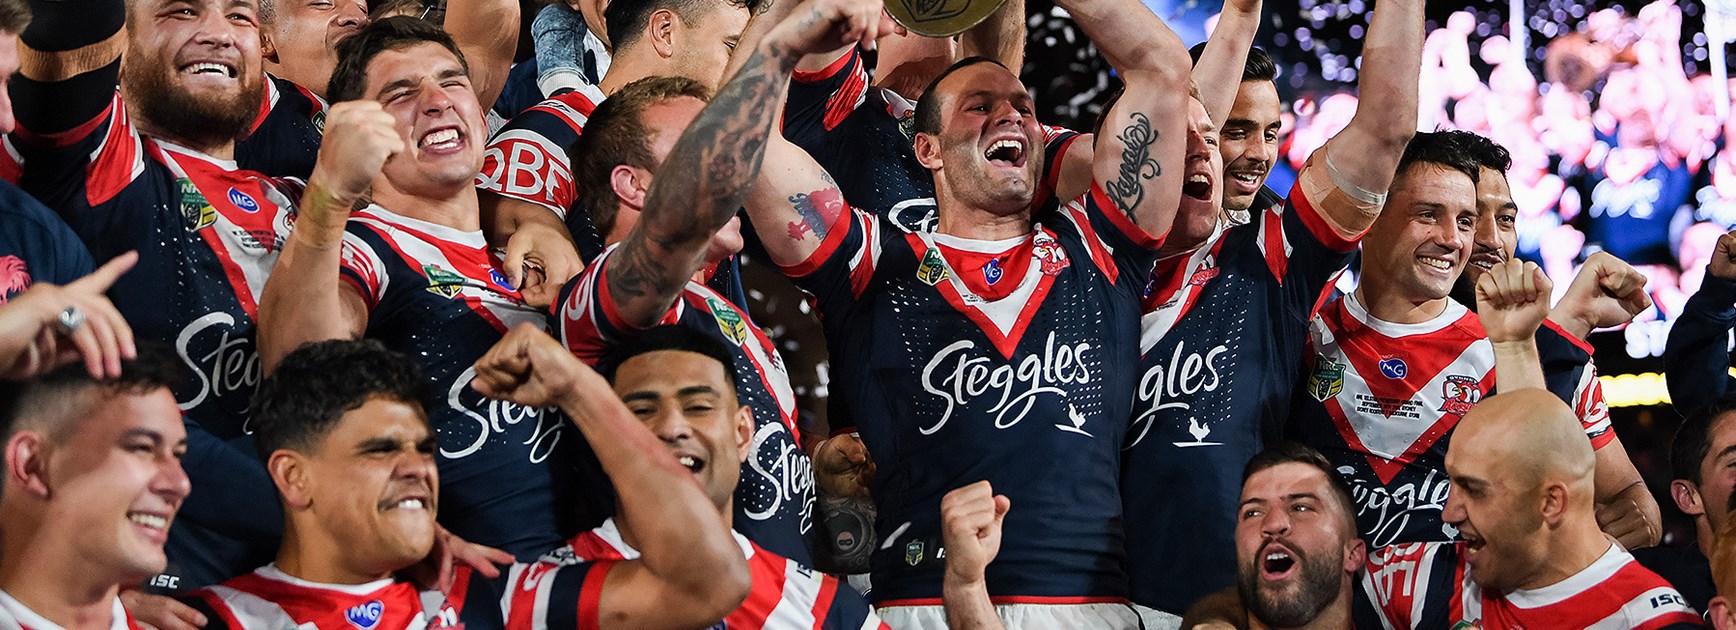 Roosters 2019 draw snapshot